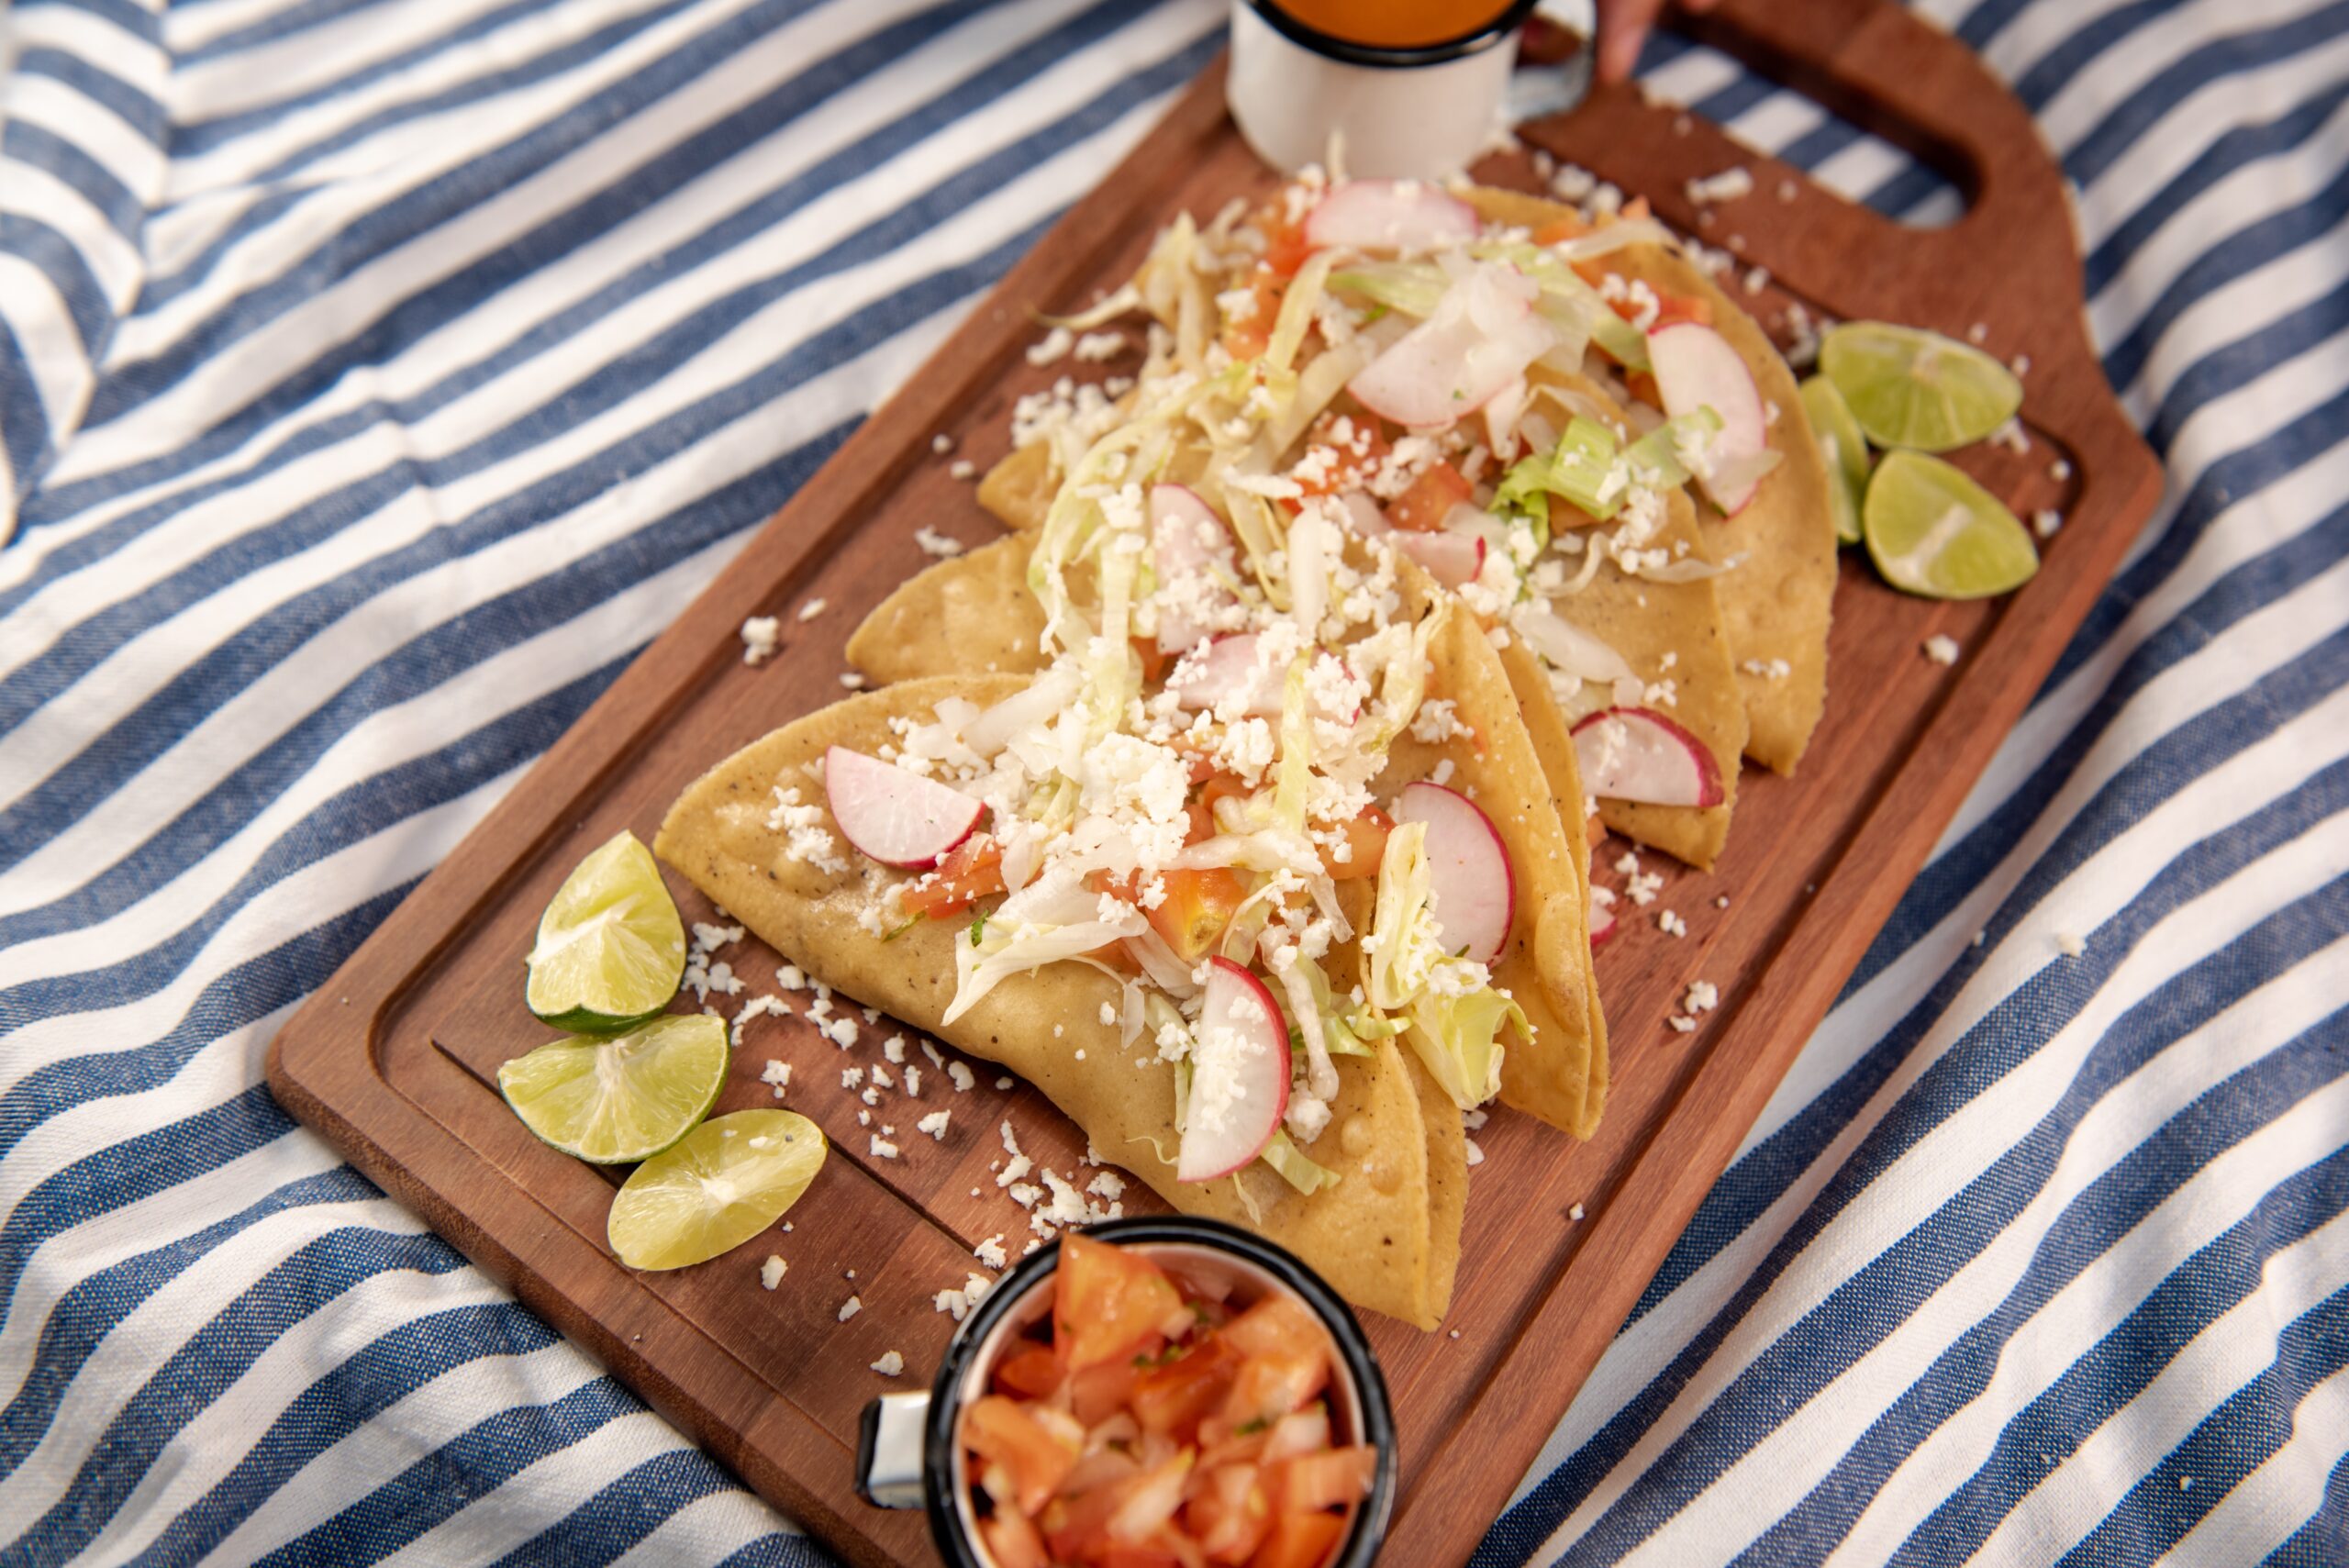 ceviche tacos